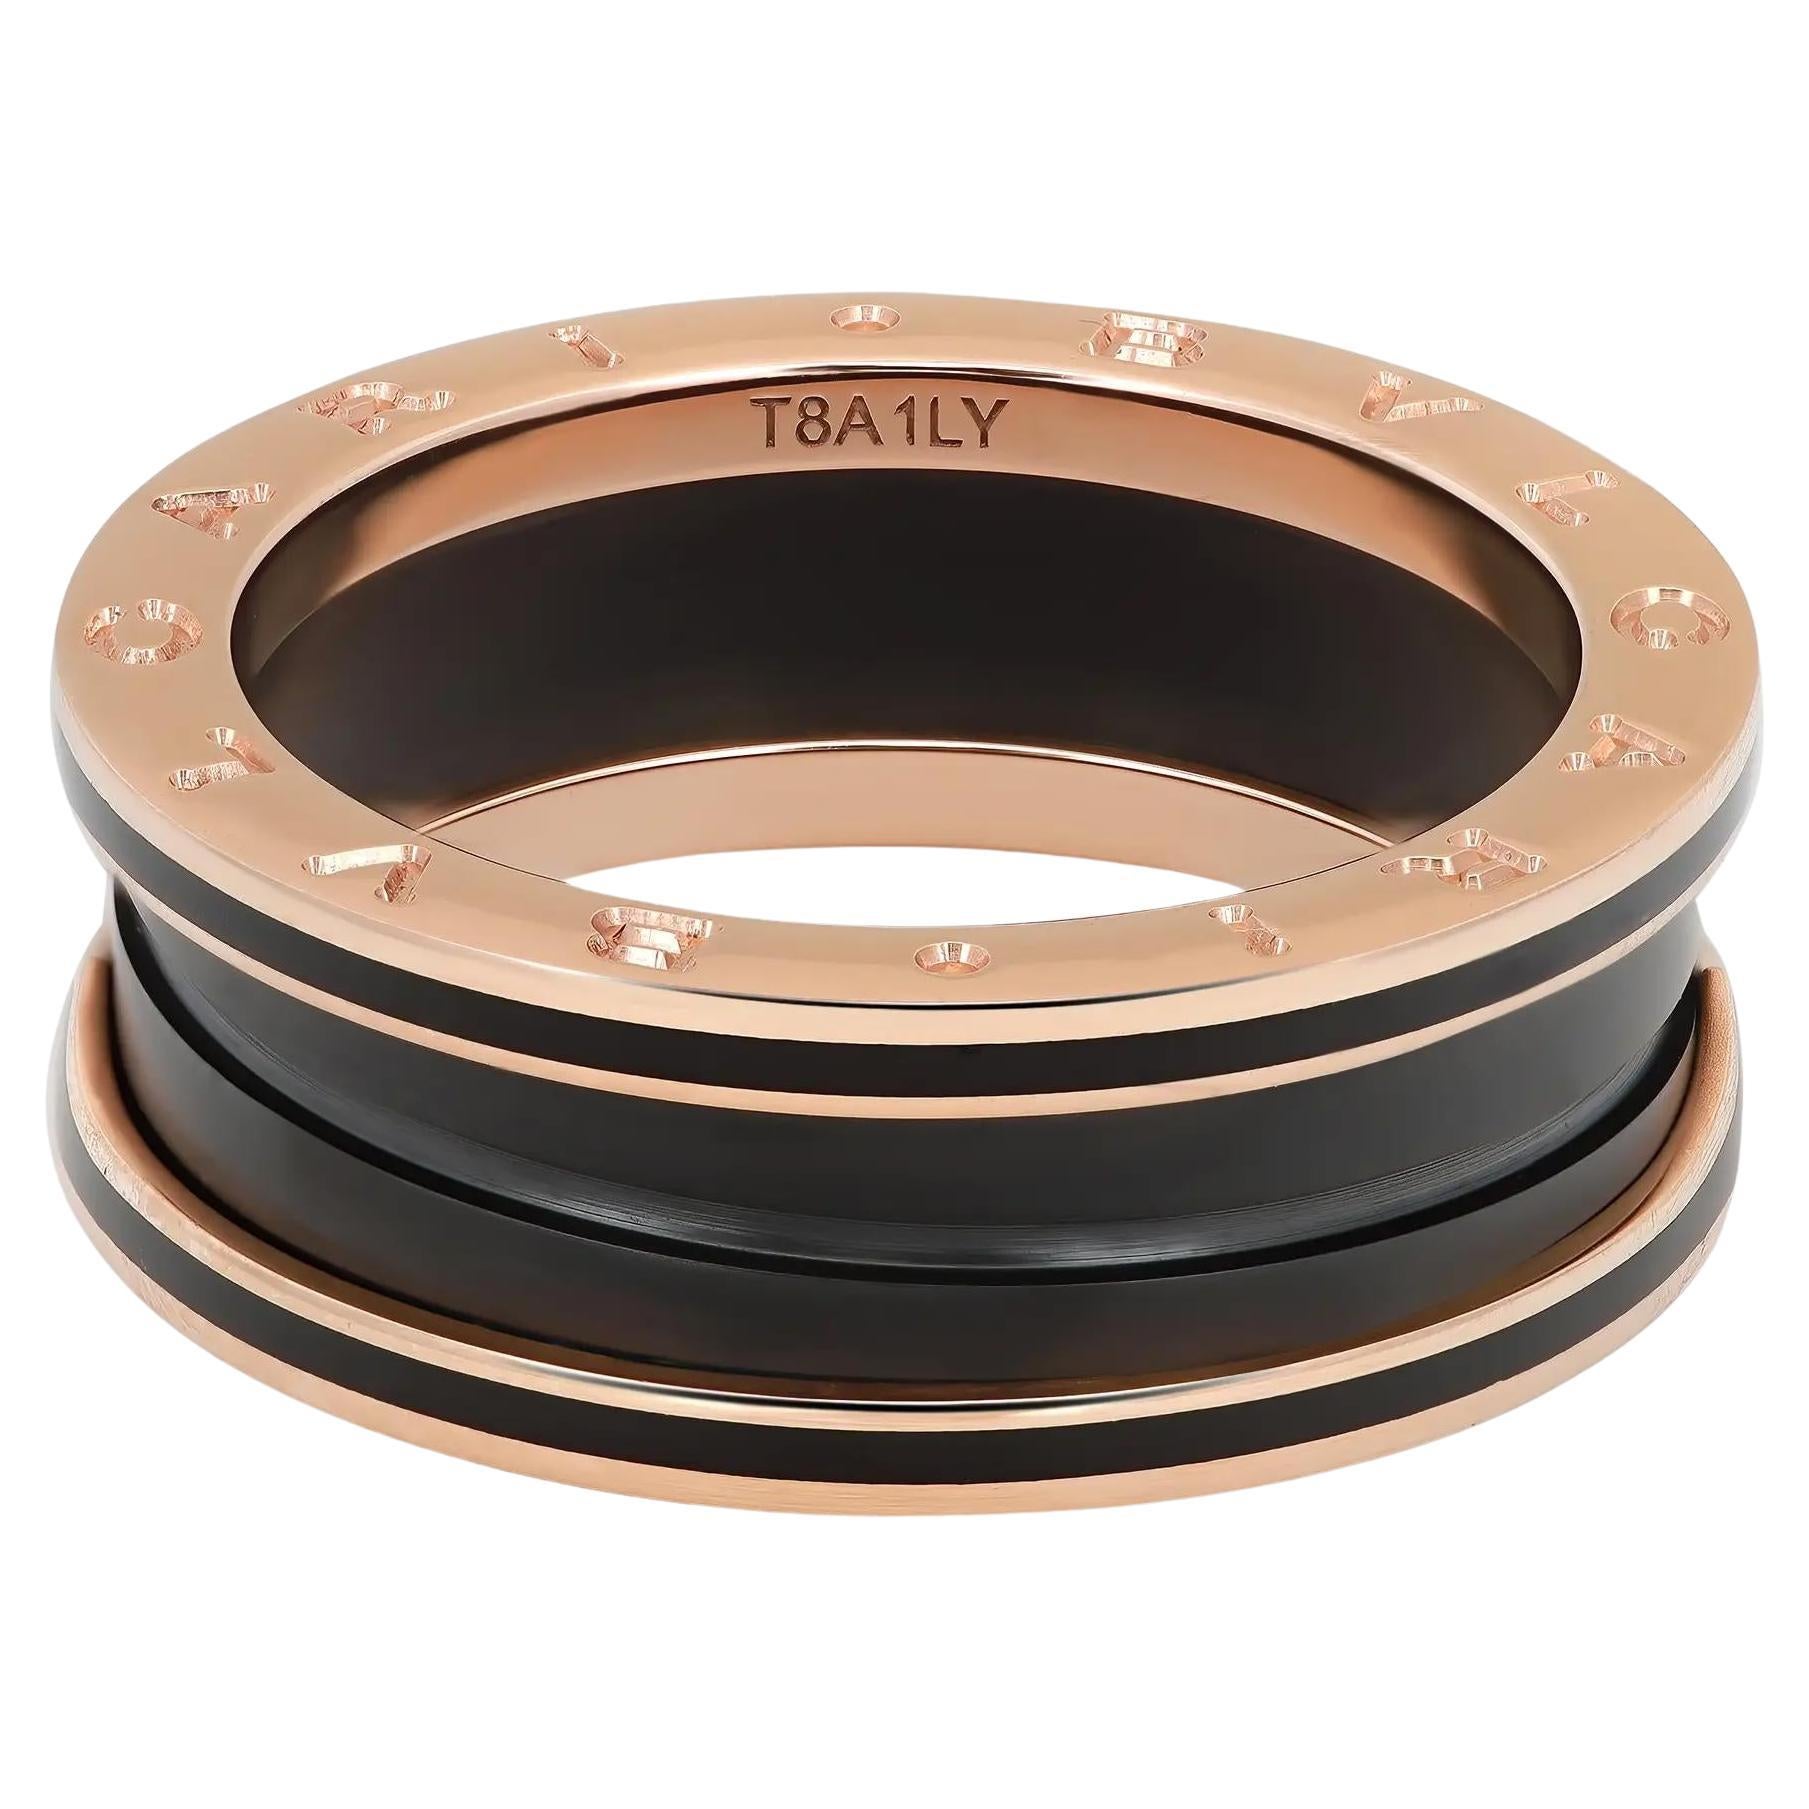 Bold and beautiful, this Bvlgari ring is a perfect addition to your statement jewelry collection. Crafted in lustrous 18K rose gold. It features a two-band B.zero1 ring with all matt black ceramic in the center with logo engraved rose gold outer